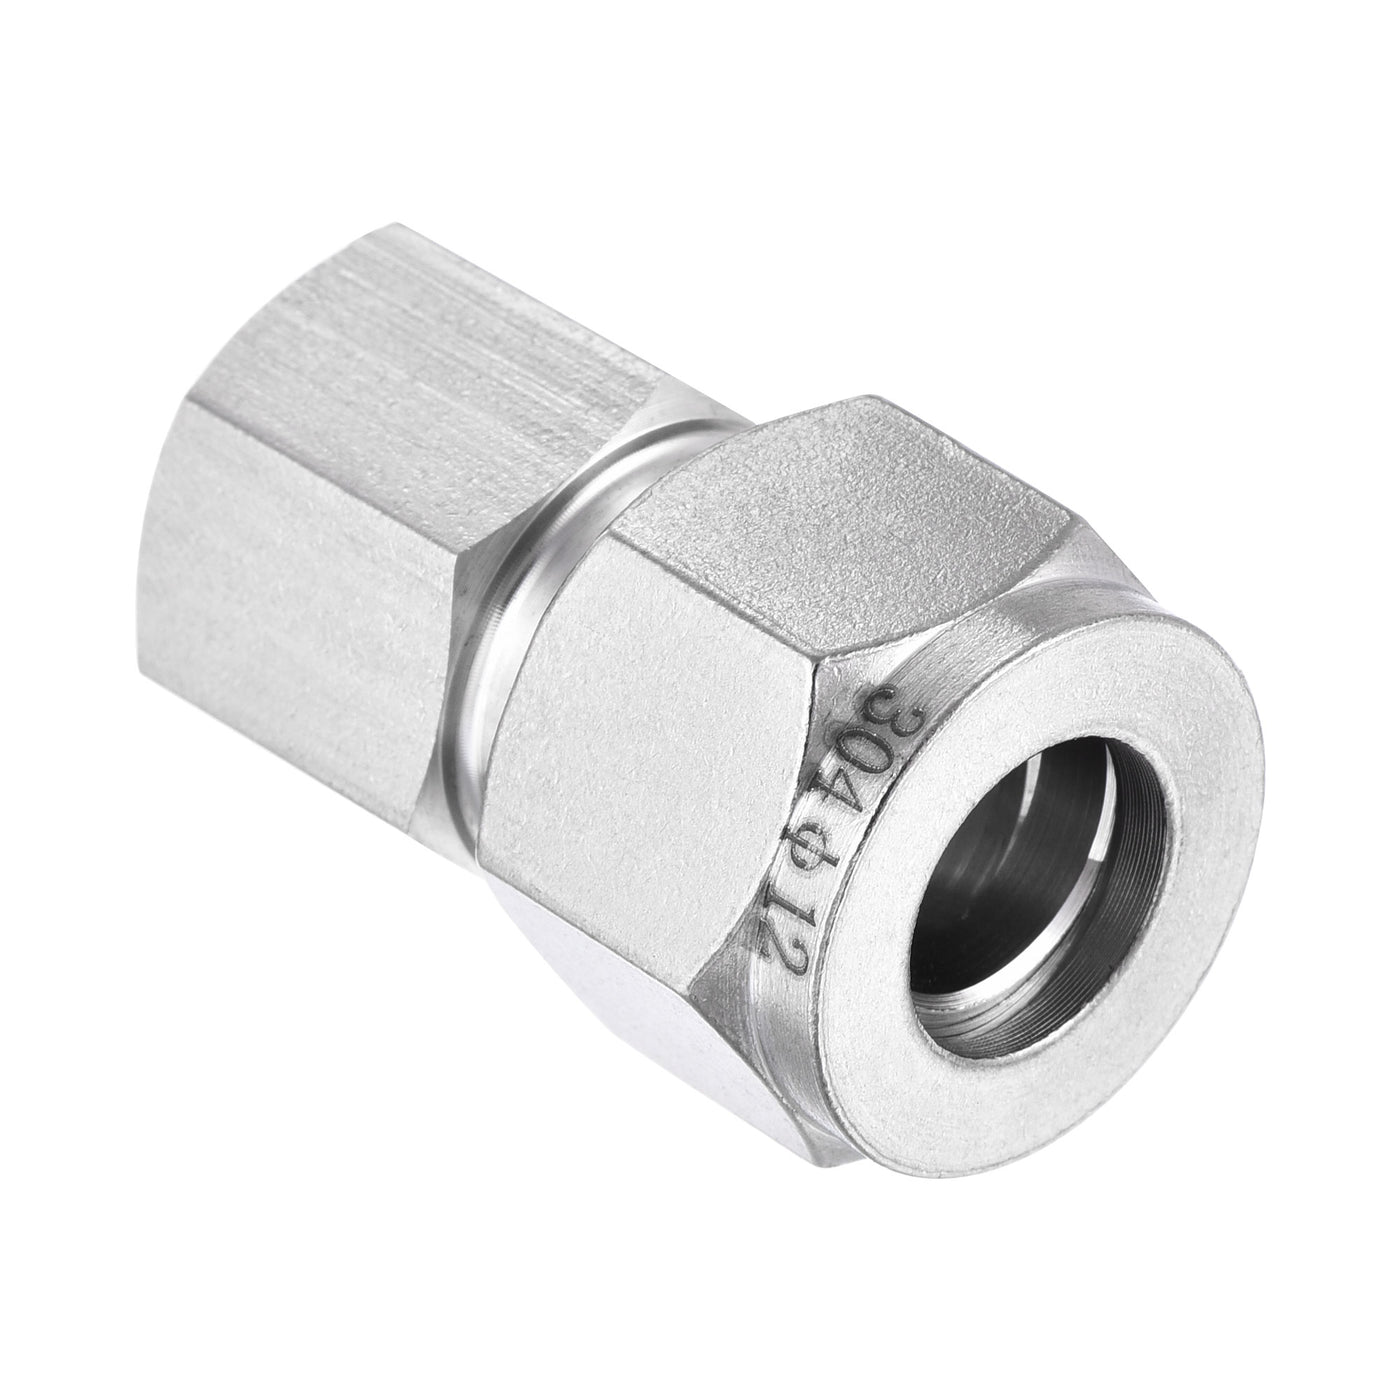 Uxcell Uxcell Compression Tube Fitting 1/4NPT Female Thread x 6mm Tube OD Straight Coupling Adapter 304 Stainless Steel